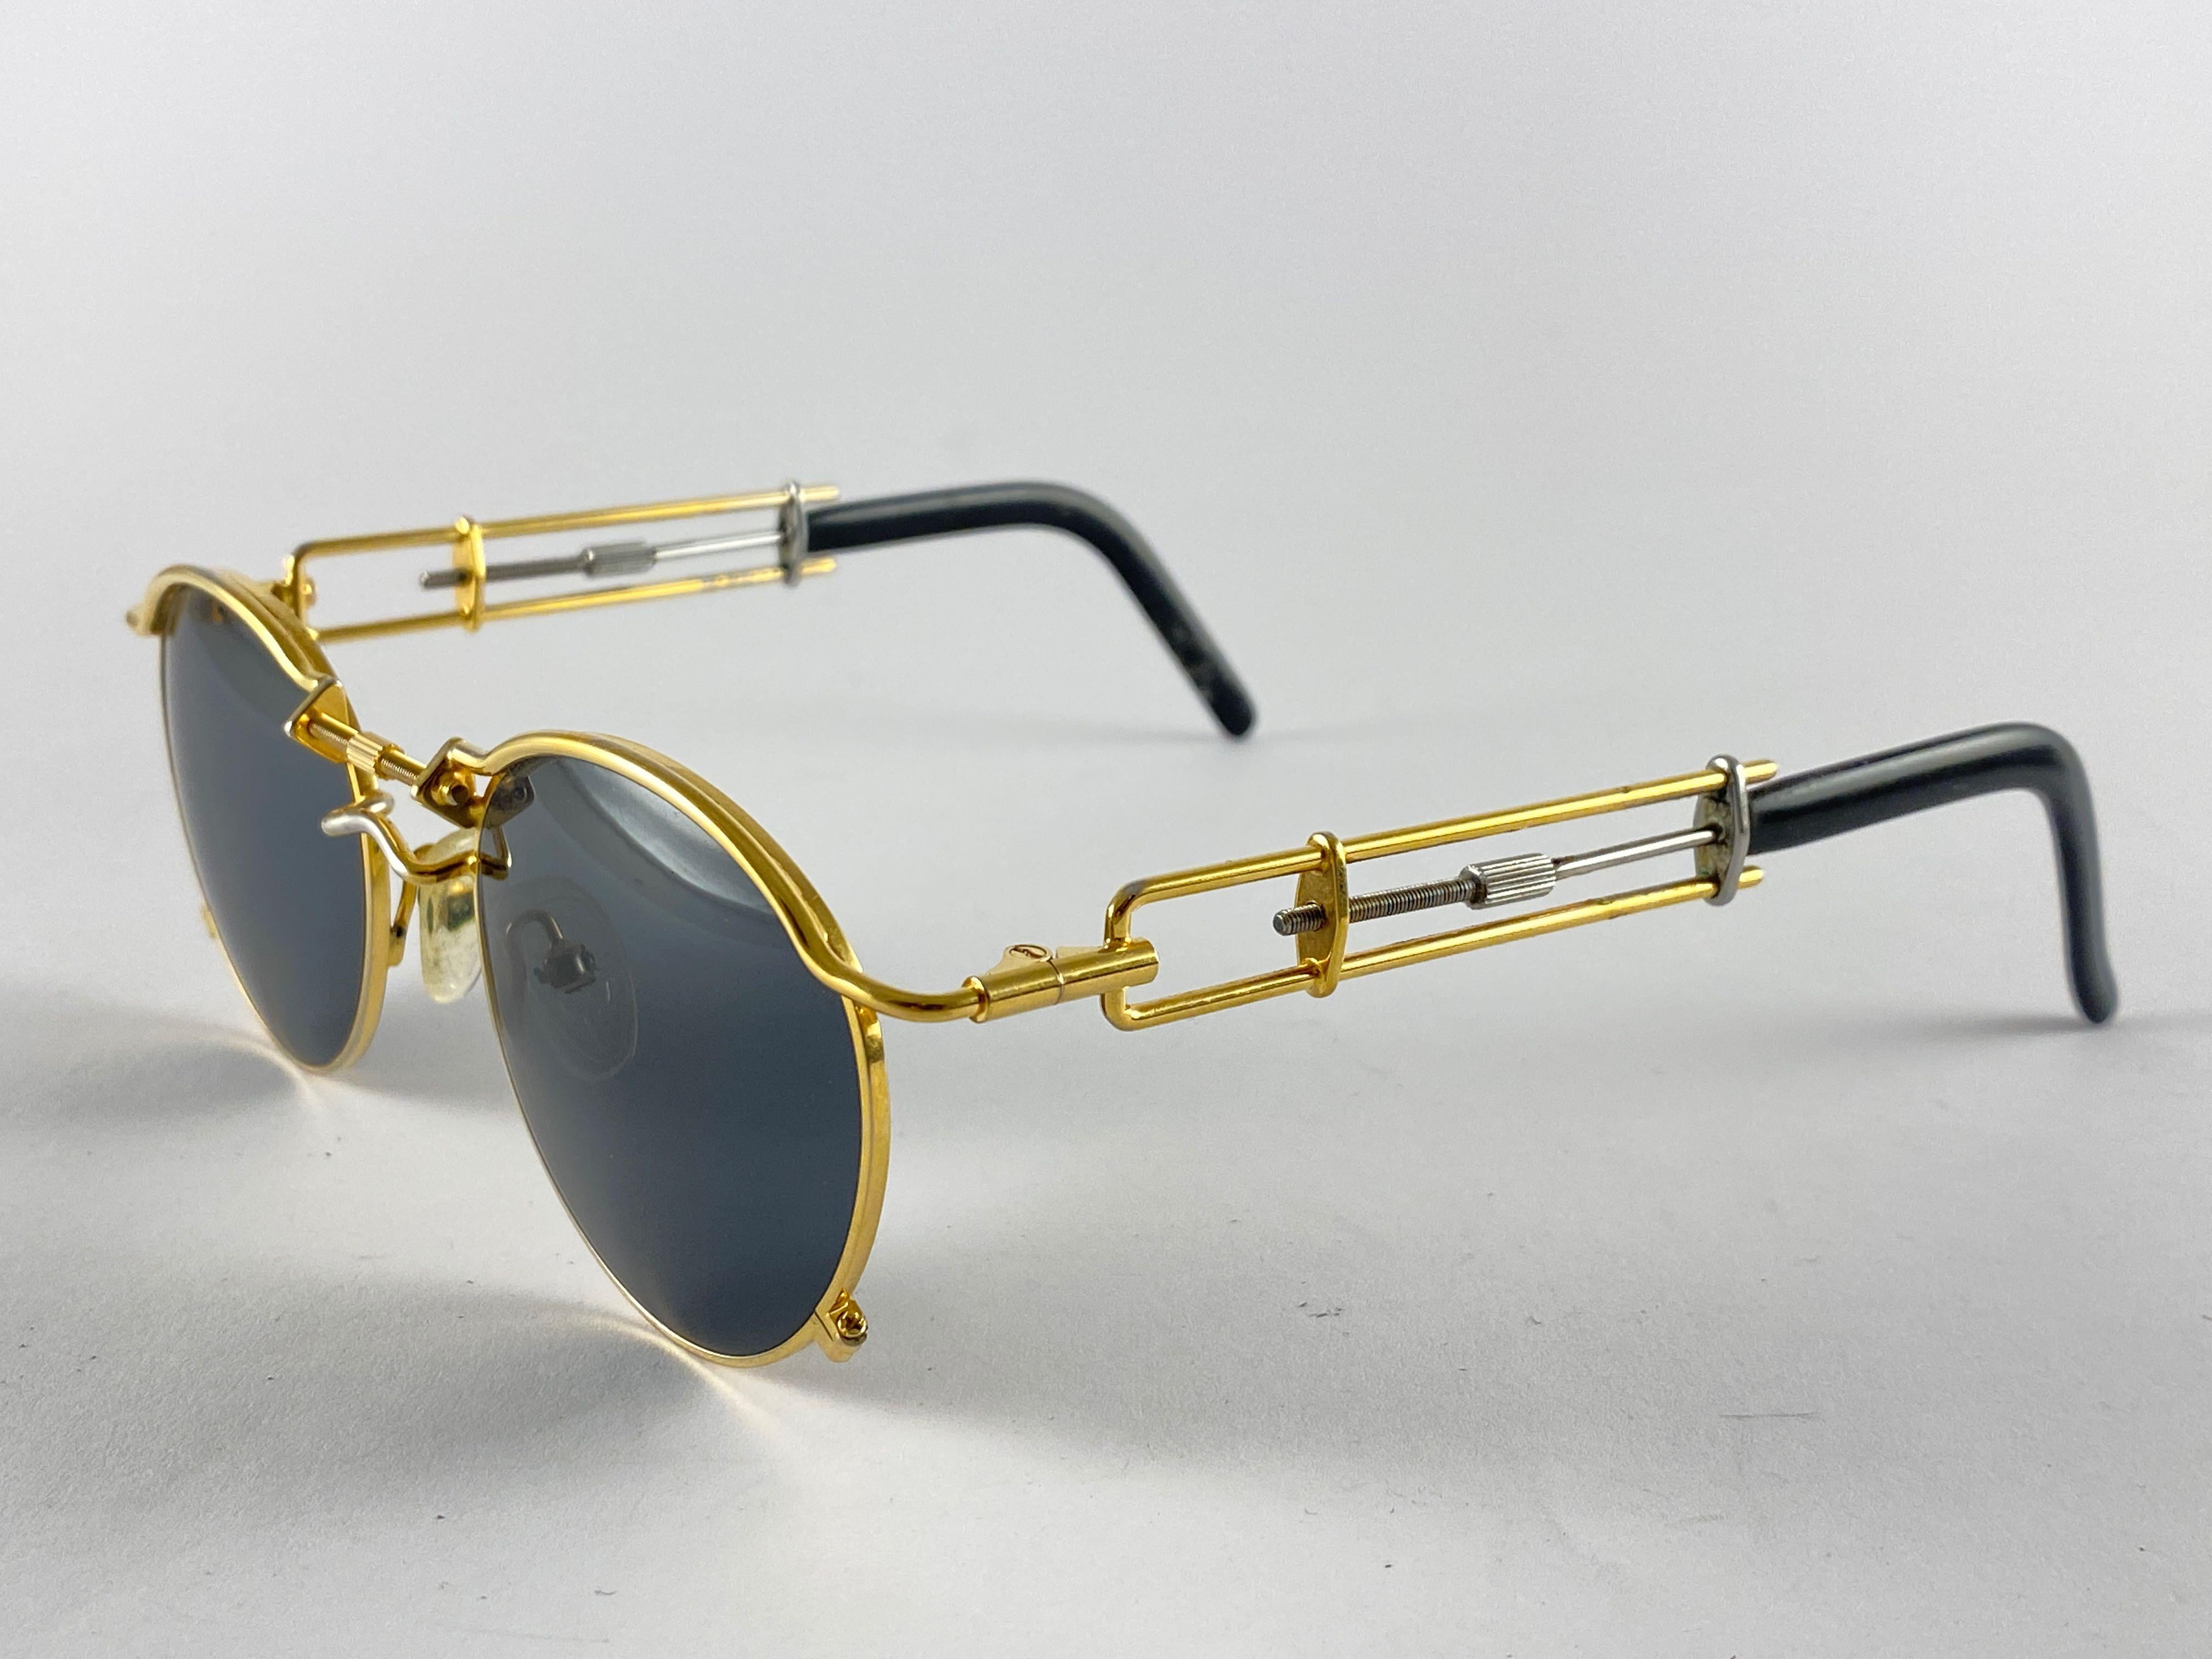 Mint Vintage Jean Paul Gaultier 56 0174 Gold & Silver 1990's Sunglasses Japan In Good Condition For Sale In Baleares, Baleares